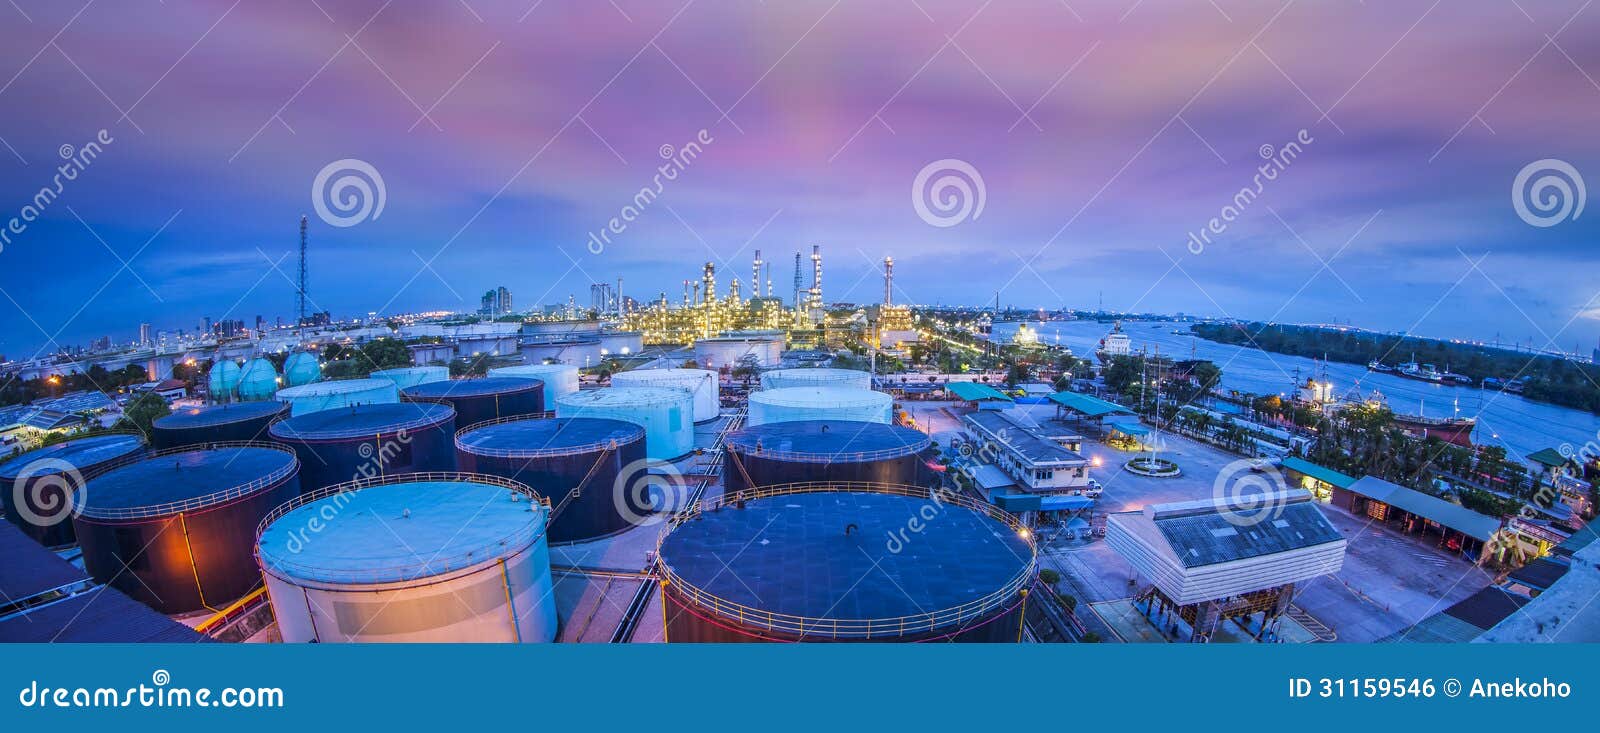 oil refinery industry with oil storage tank